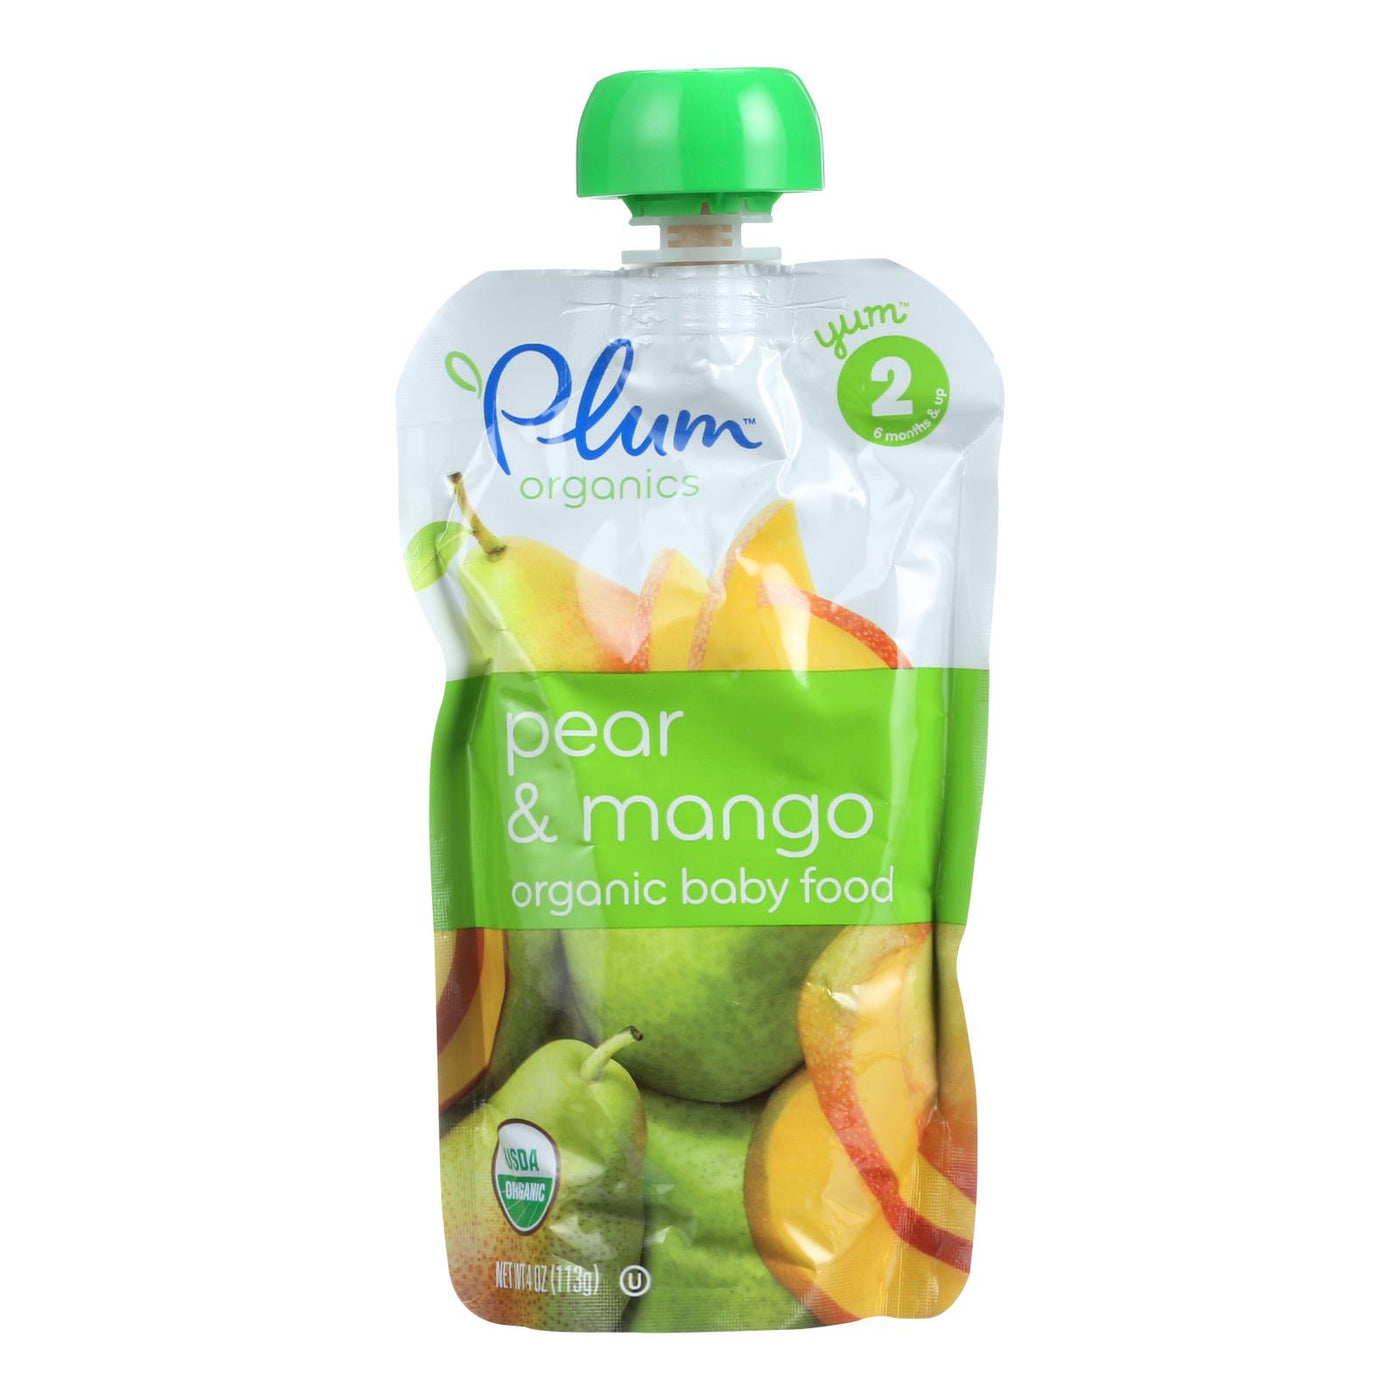 Plum Organics Baby Food - Organic - Pear And Mango - Stage 2 - 6 Months And Up - 3.5 .oz - Case Of 6 | OnlyNaturals.us